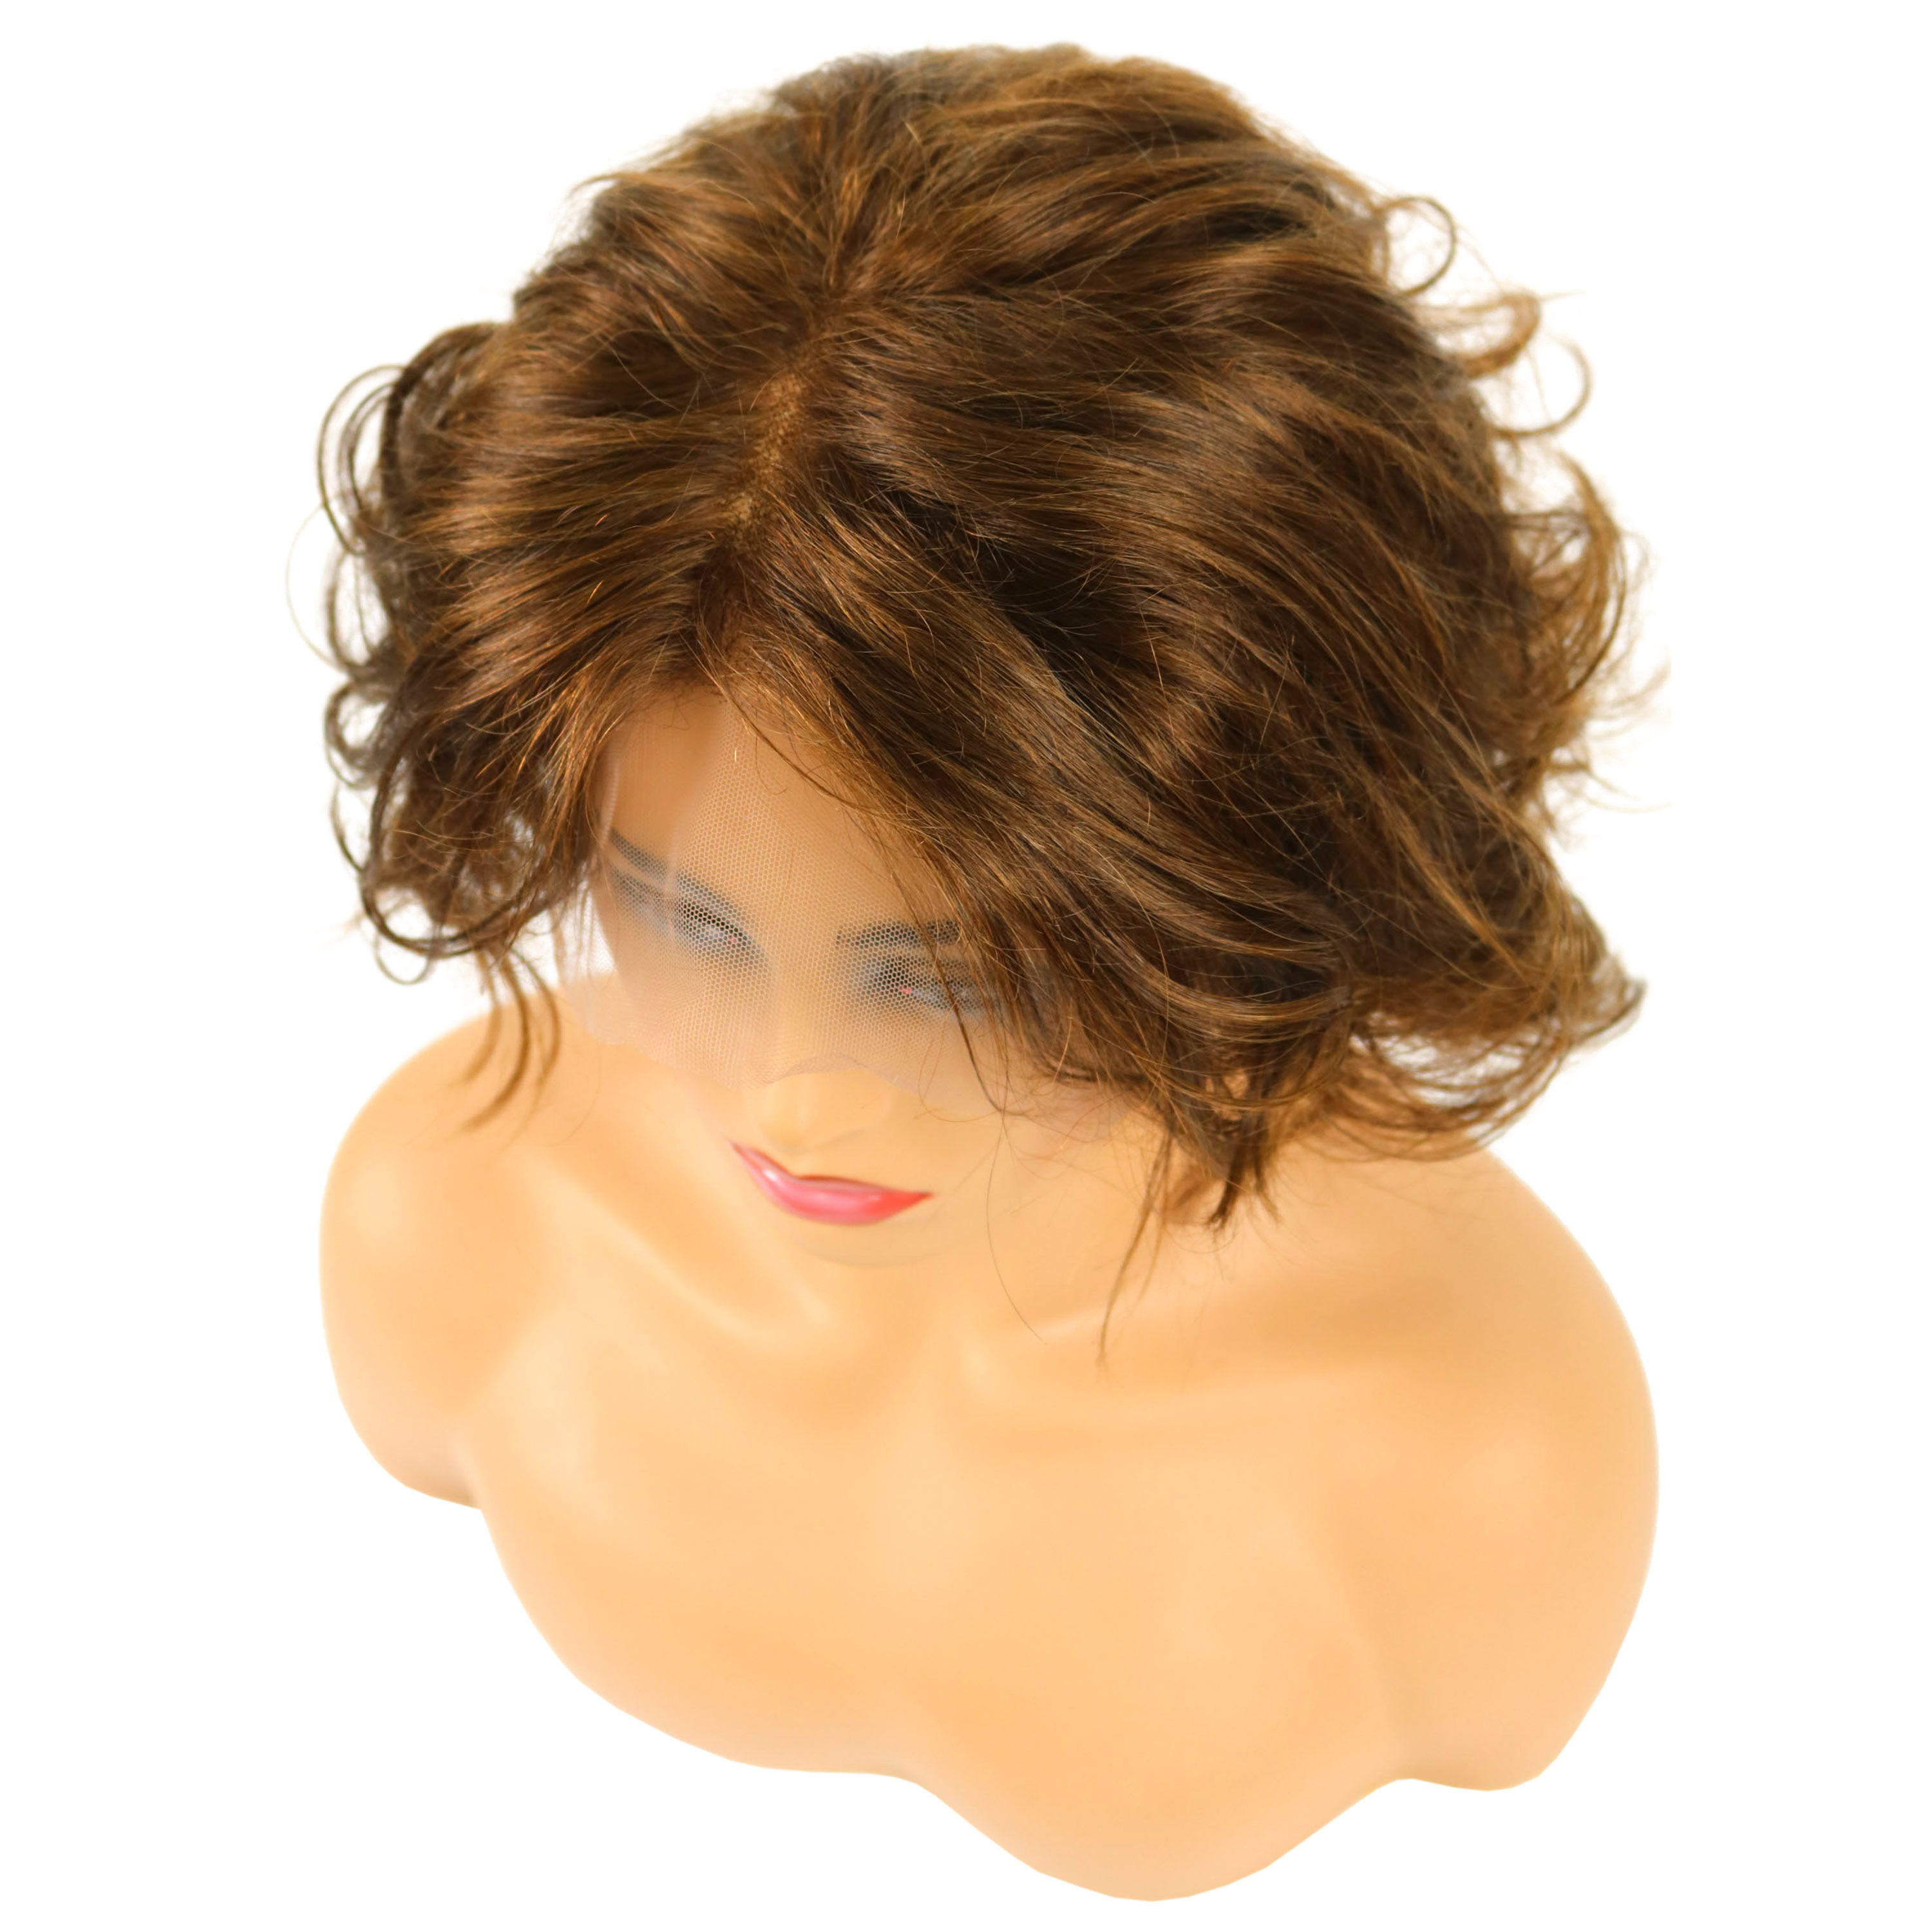 Alfre Woodard Short Wave Hairstyle Fluffy Natural Smooth Full Lace Wig 100% Real Human Hair 12 Inches